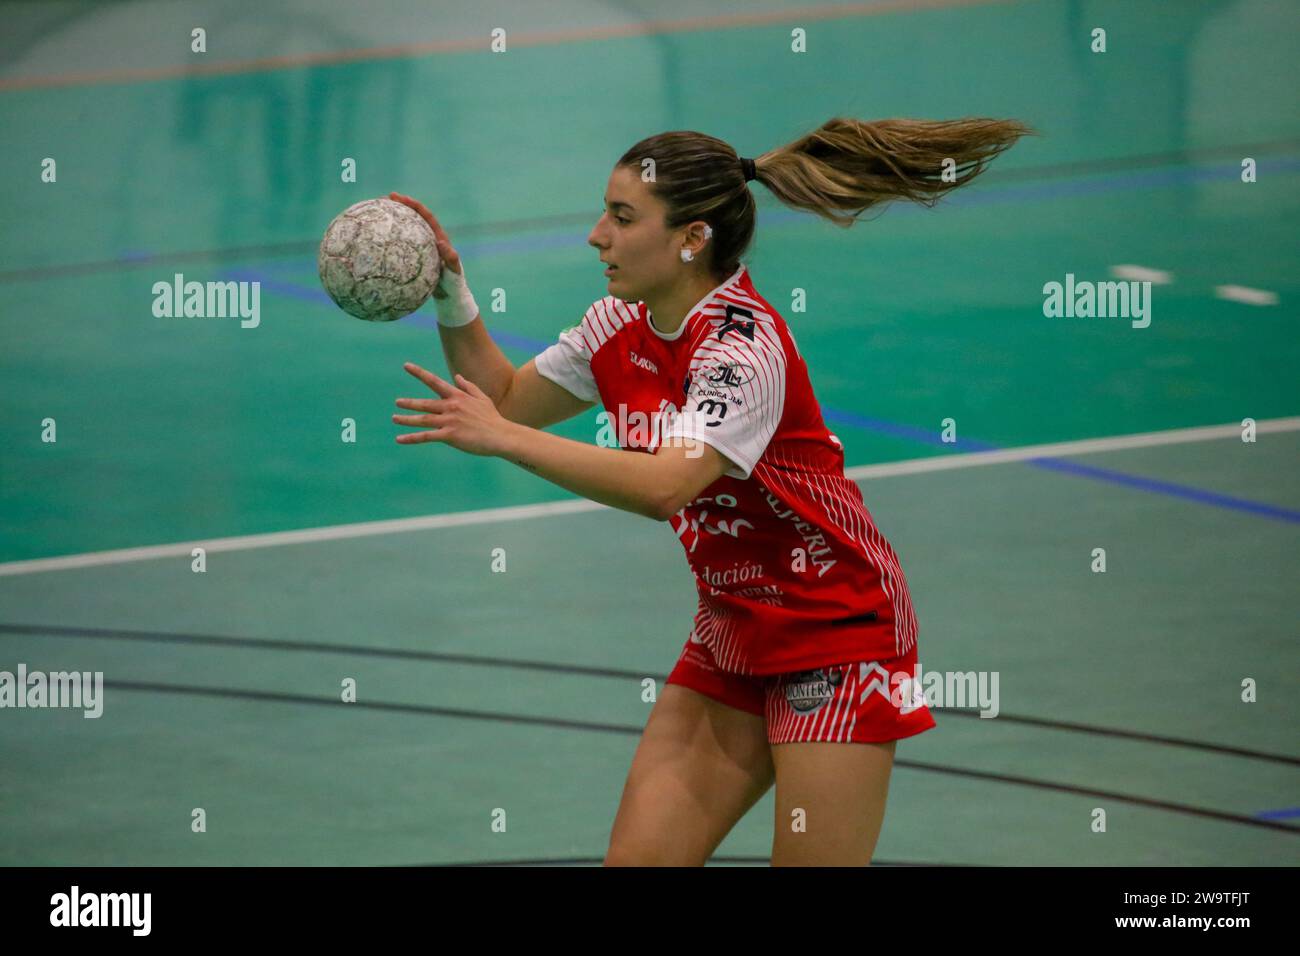 Gijon, Spain. 29th Dec, 2023. The player of Motive.co Gijon Balonmano La Calzada, Marta da Silva (19) with the ball during the 13th matchday of the Liga Guerreras Iberdrola 2023-24 between Motive.co Gijon Balonmano La Calzada and the Mecalia Atletico Guardes, on December 29, 2023, at the La Arena Pavilion, in Gijon, Spain. (Photo by Alberto Brevers/Pacific Press) Credit: Pacific Press Media Production Corp./Alamy Live News Stock Photo